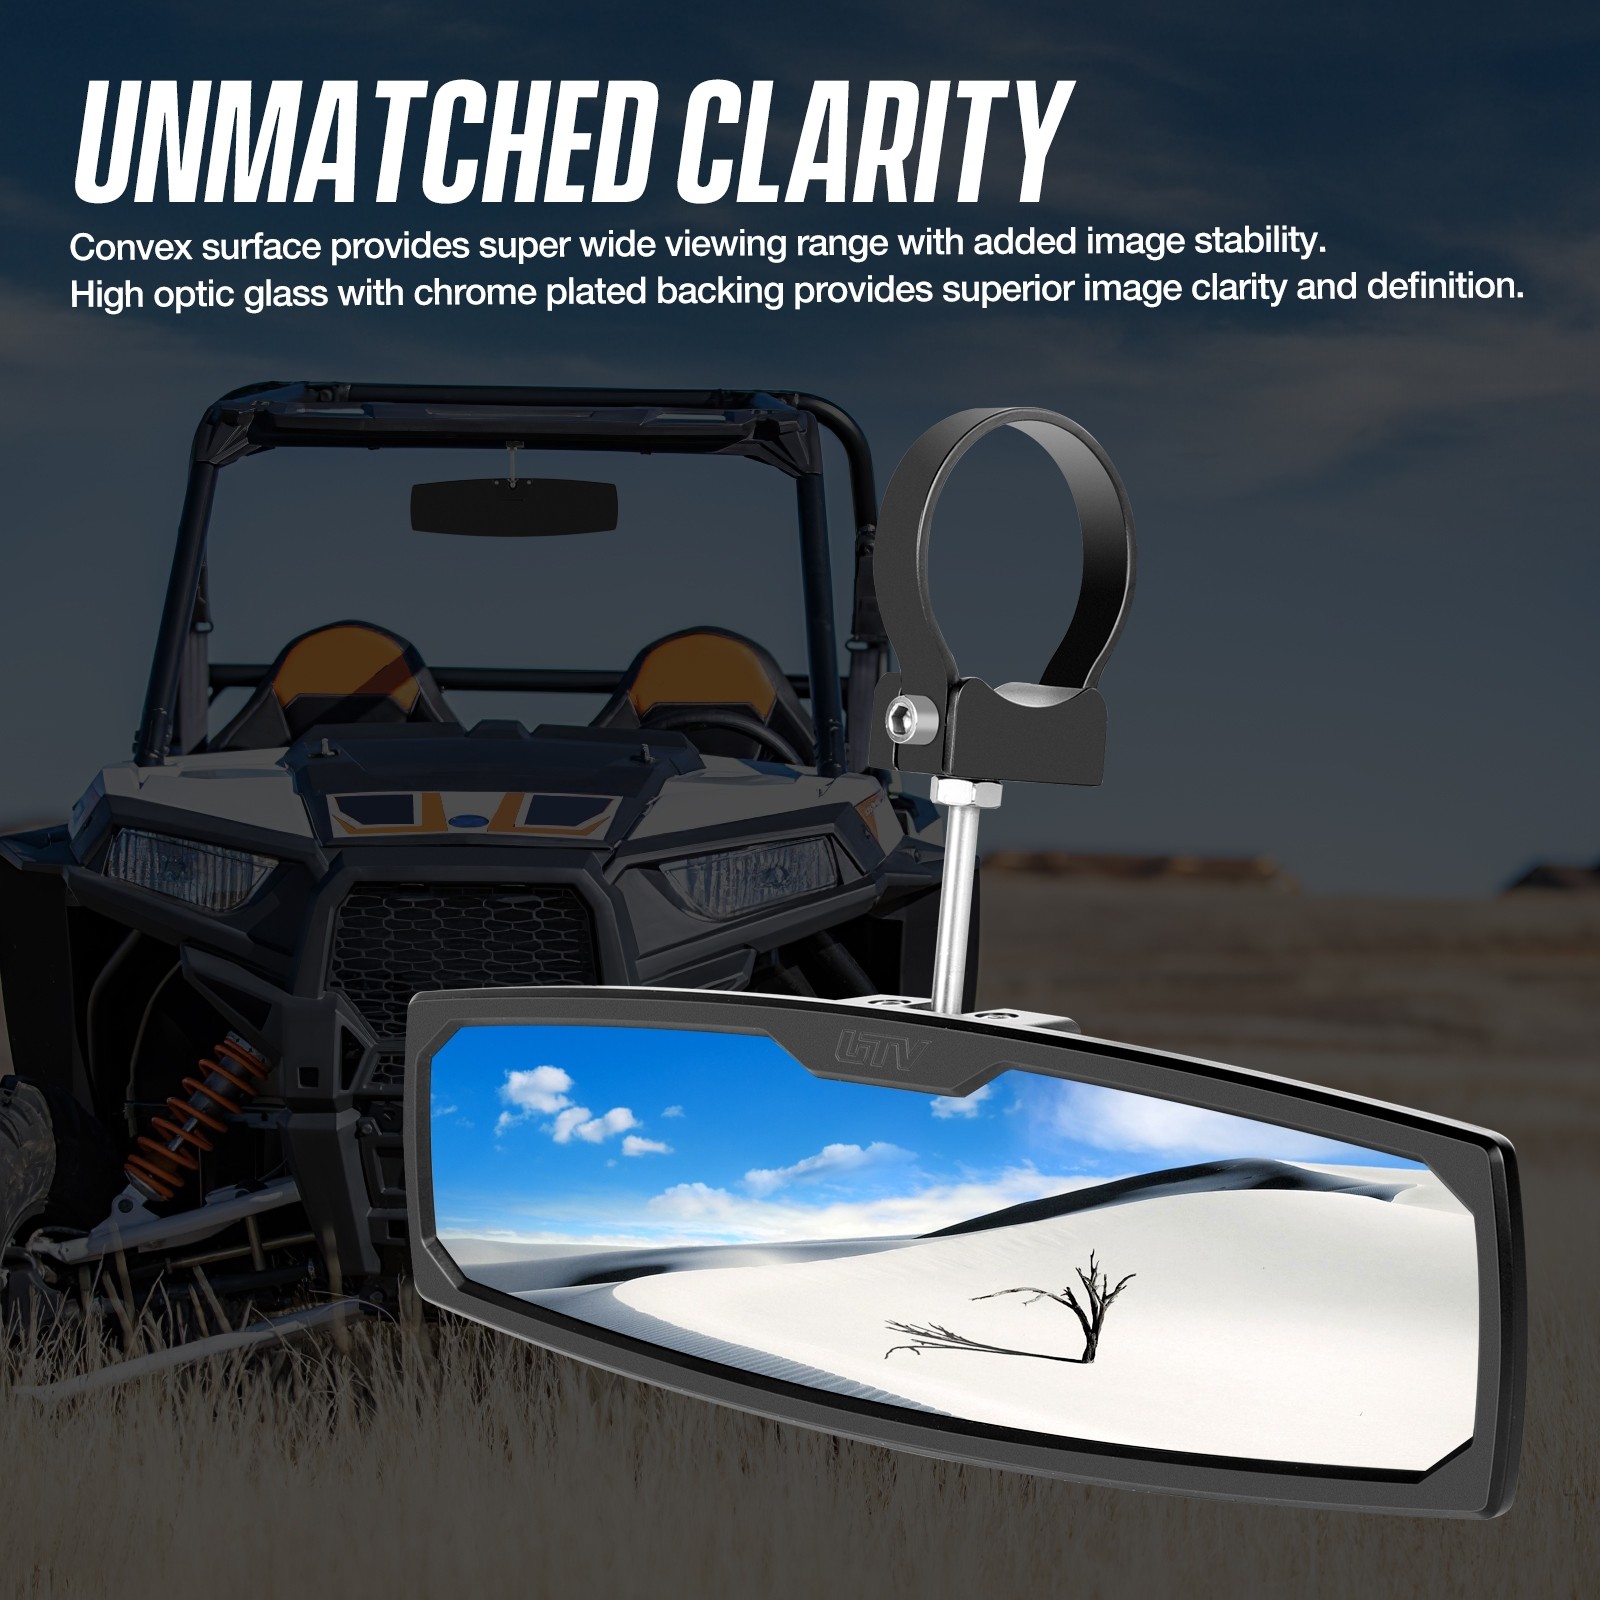 Patent Design Aluminum Curved Rearview Mirrors fits 1.75-2 Mount for Polaris RZR Can-Am X3 Kawasaki Yamaha Xprite 17.5 UTV Rear View Center Mirror w/ Interior Lights and Rocker Switch 